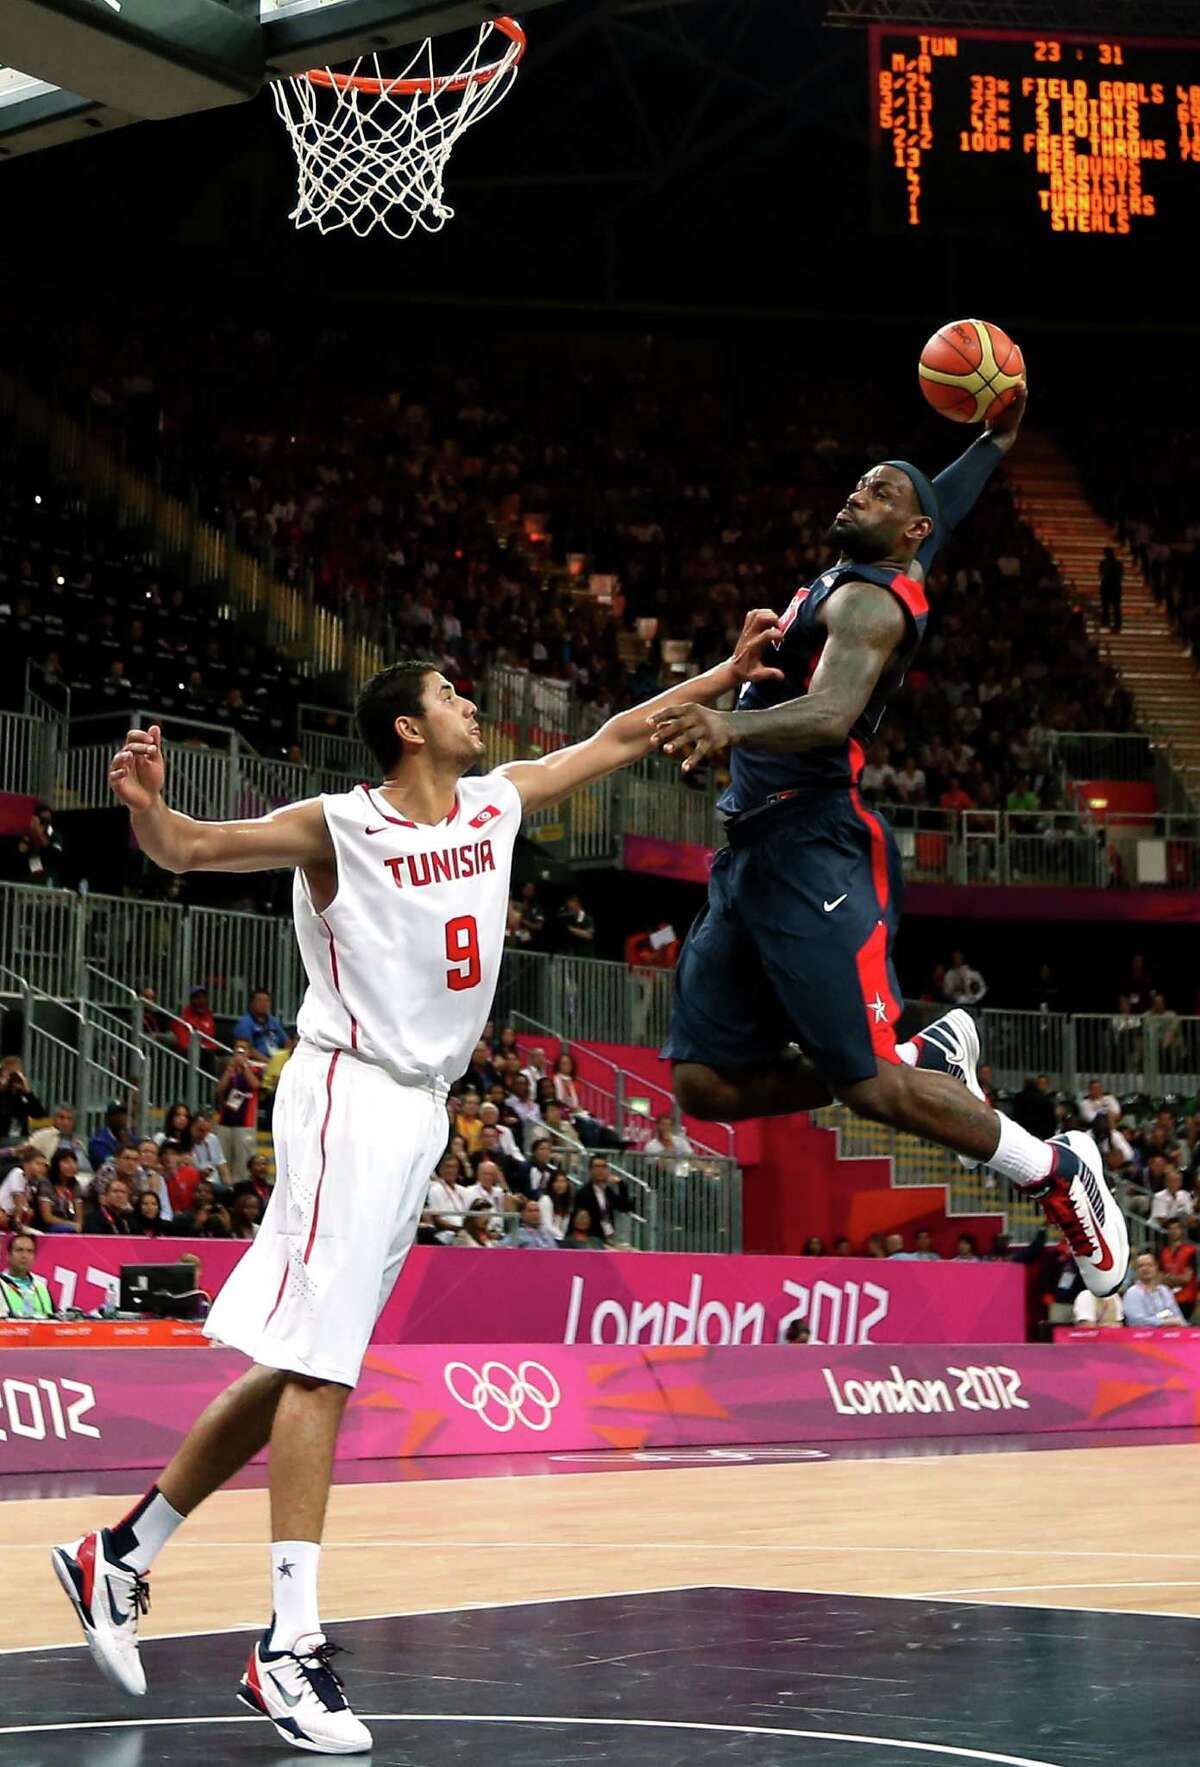 LONDON, ENGLAND - JULY 31: Lebron James #6 of United States dunks the ball over Mohamed Hadidane #9 of Tunisia during the Men's Basketball Preliminary Round match on Day 4 of the London 2012 Olympic Games at Basketball Arena on July 31, 2012 in London, England. (Photo by Ezra Shaw/Getty Images) ***BESTPIX***